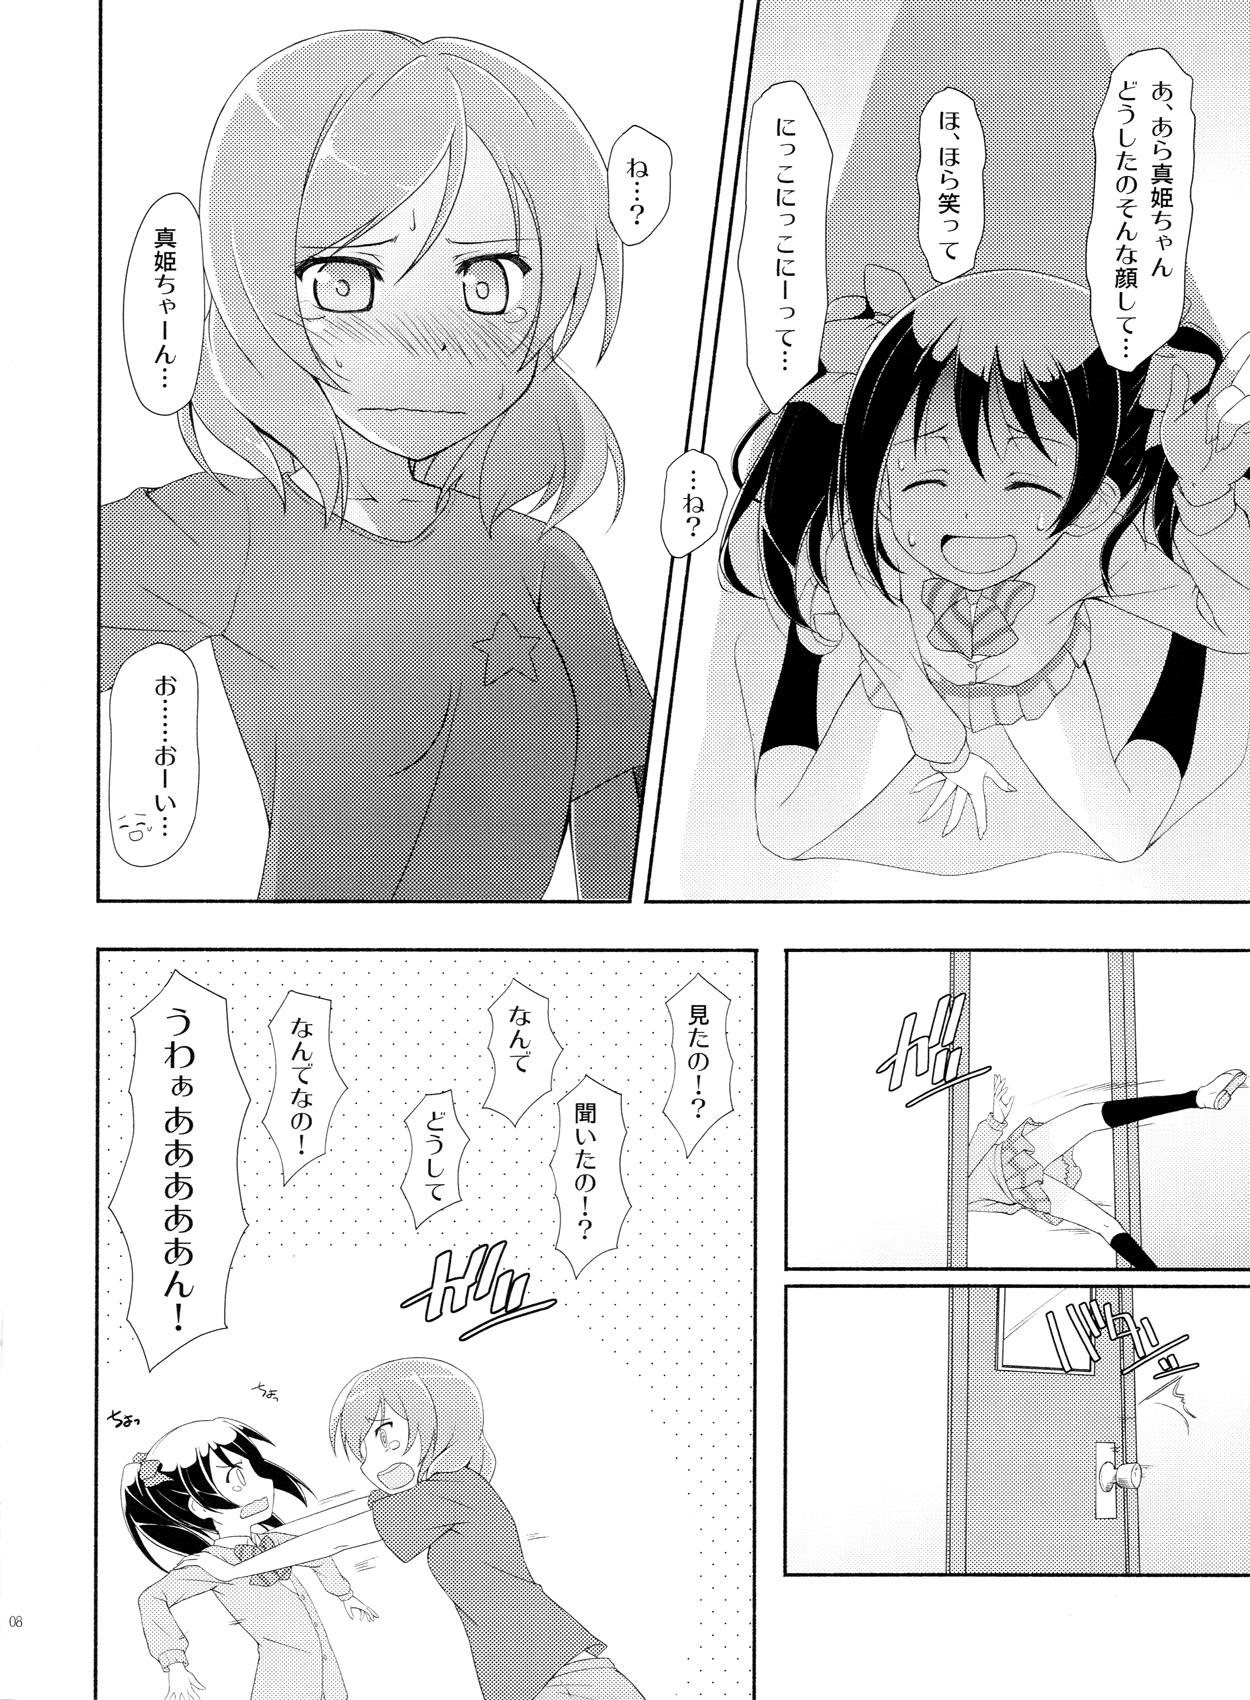 Chat Love White - Love live Family Taboo - Page 7